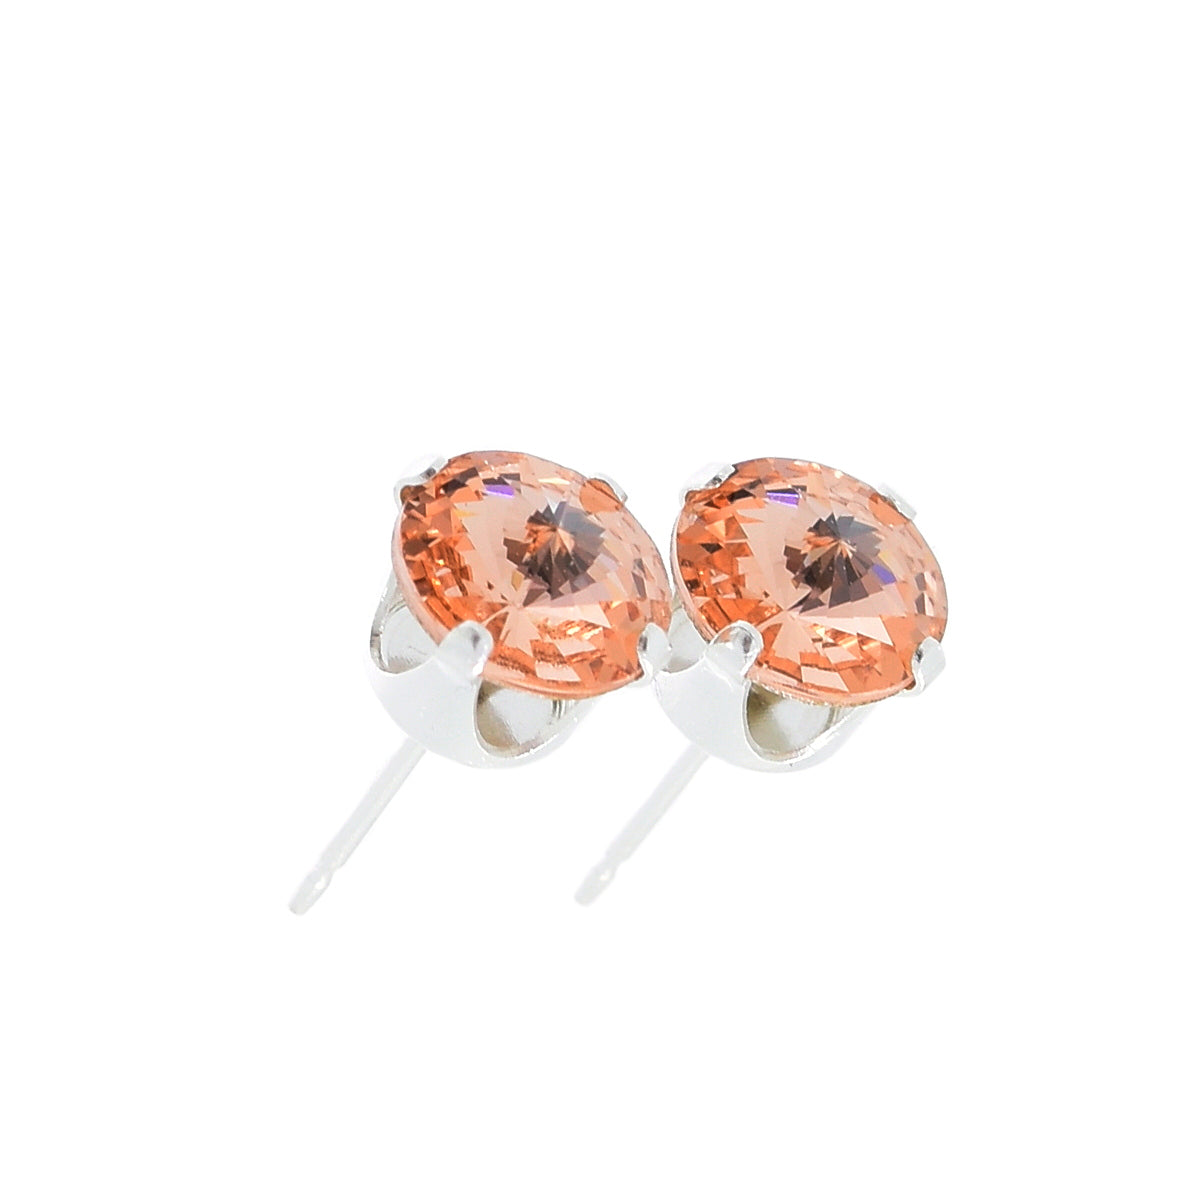 pewterhooter® Women's Classic Collection 925 Sterling silver earrings with brilliant Light Peach crystals, packaged in a gift box for any occasion.